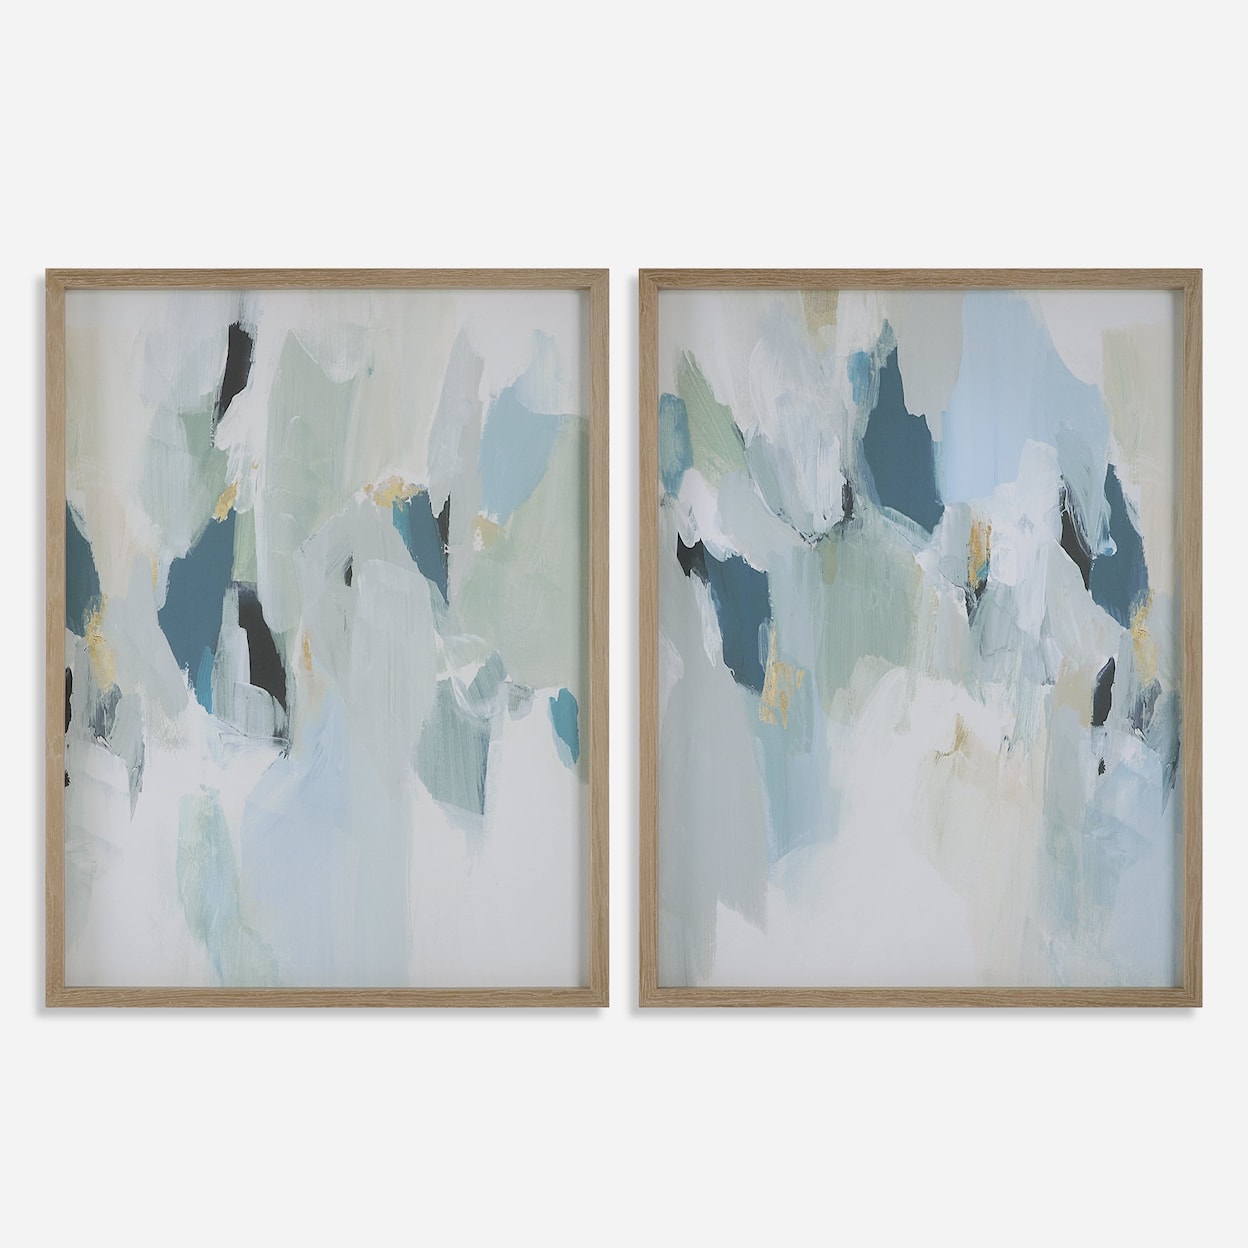 Uttermost Seabreeze Abstract Framed Canvas Prints Set/2